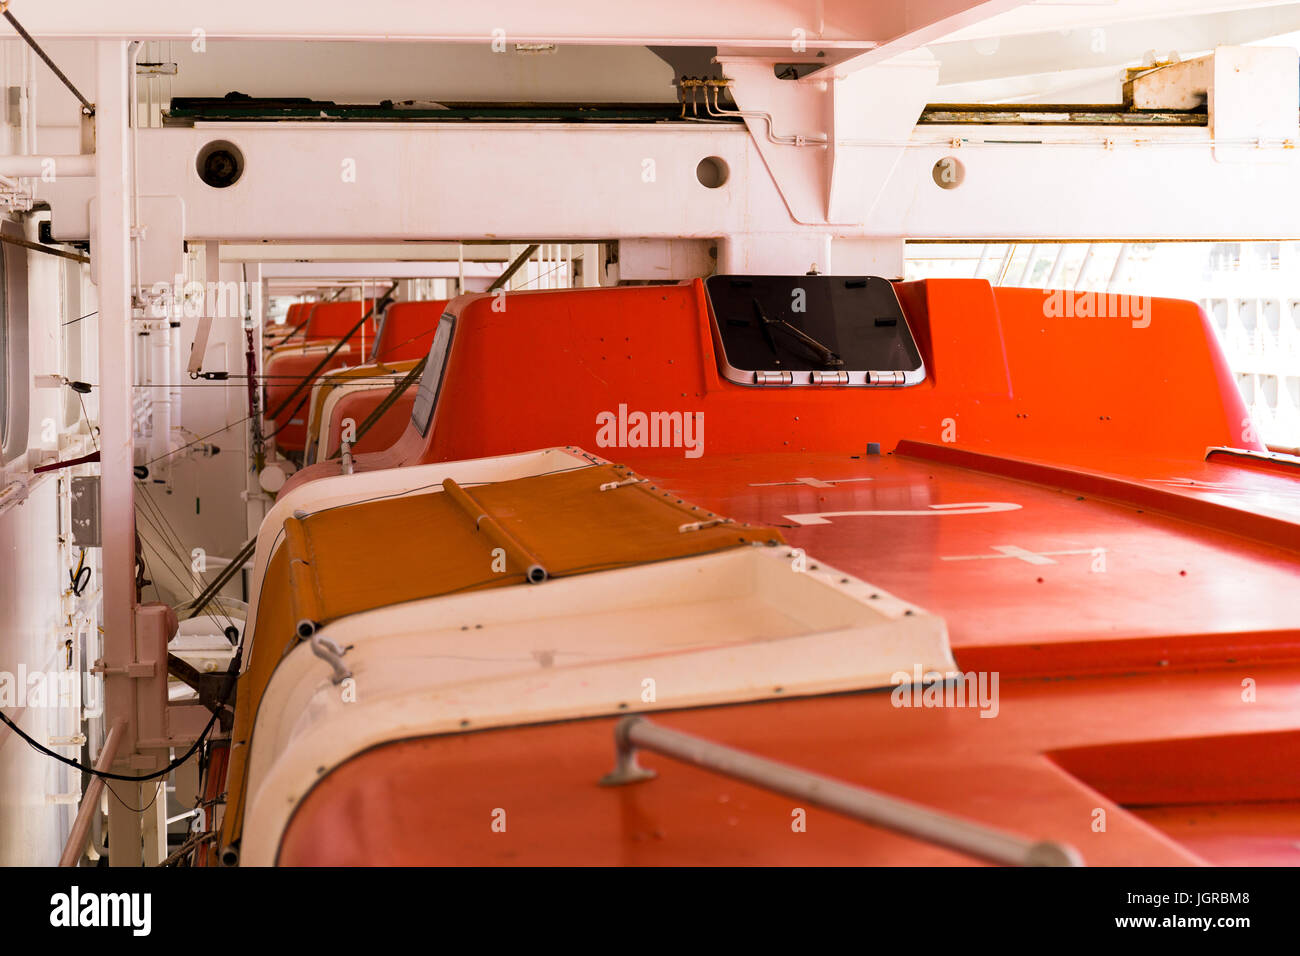 Stowed and secured lifeboats onboard modern British passenger ship Ventura Stock Photo